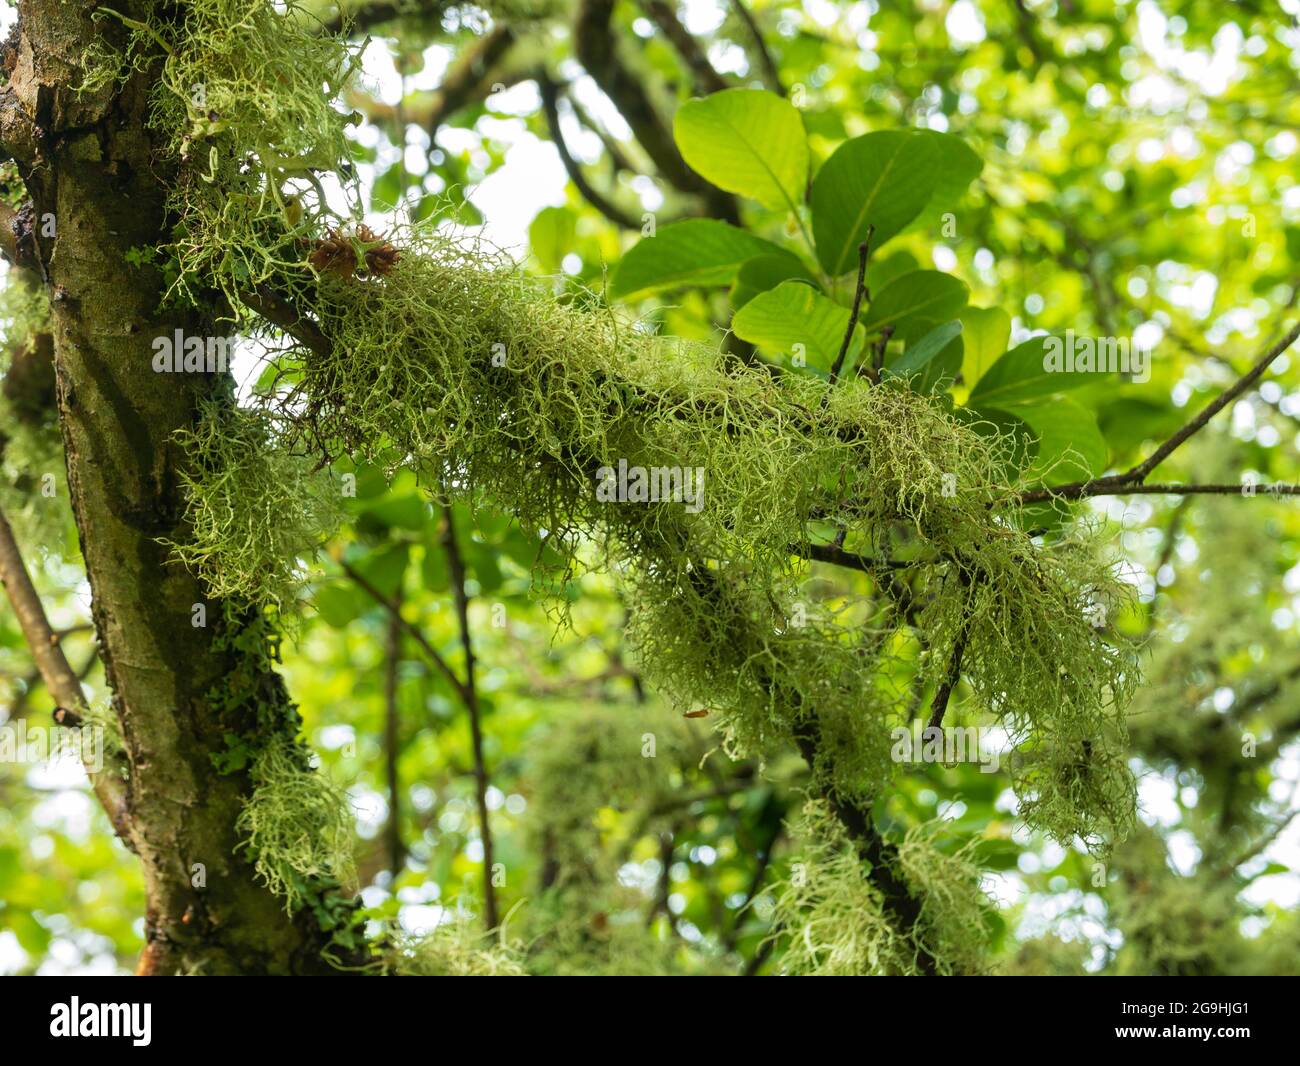 Lichens growing on a tree, St Mary's, Isles of Scilly, Cornwall, England, UK. Stock Photo